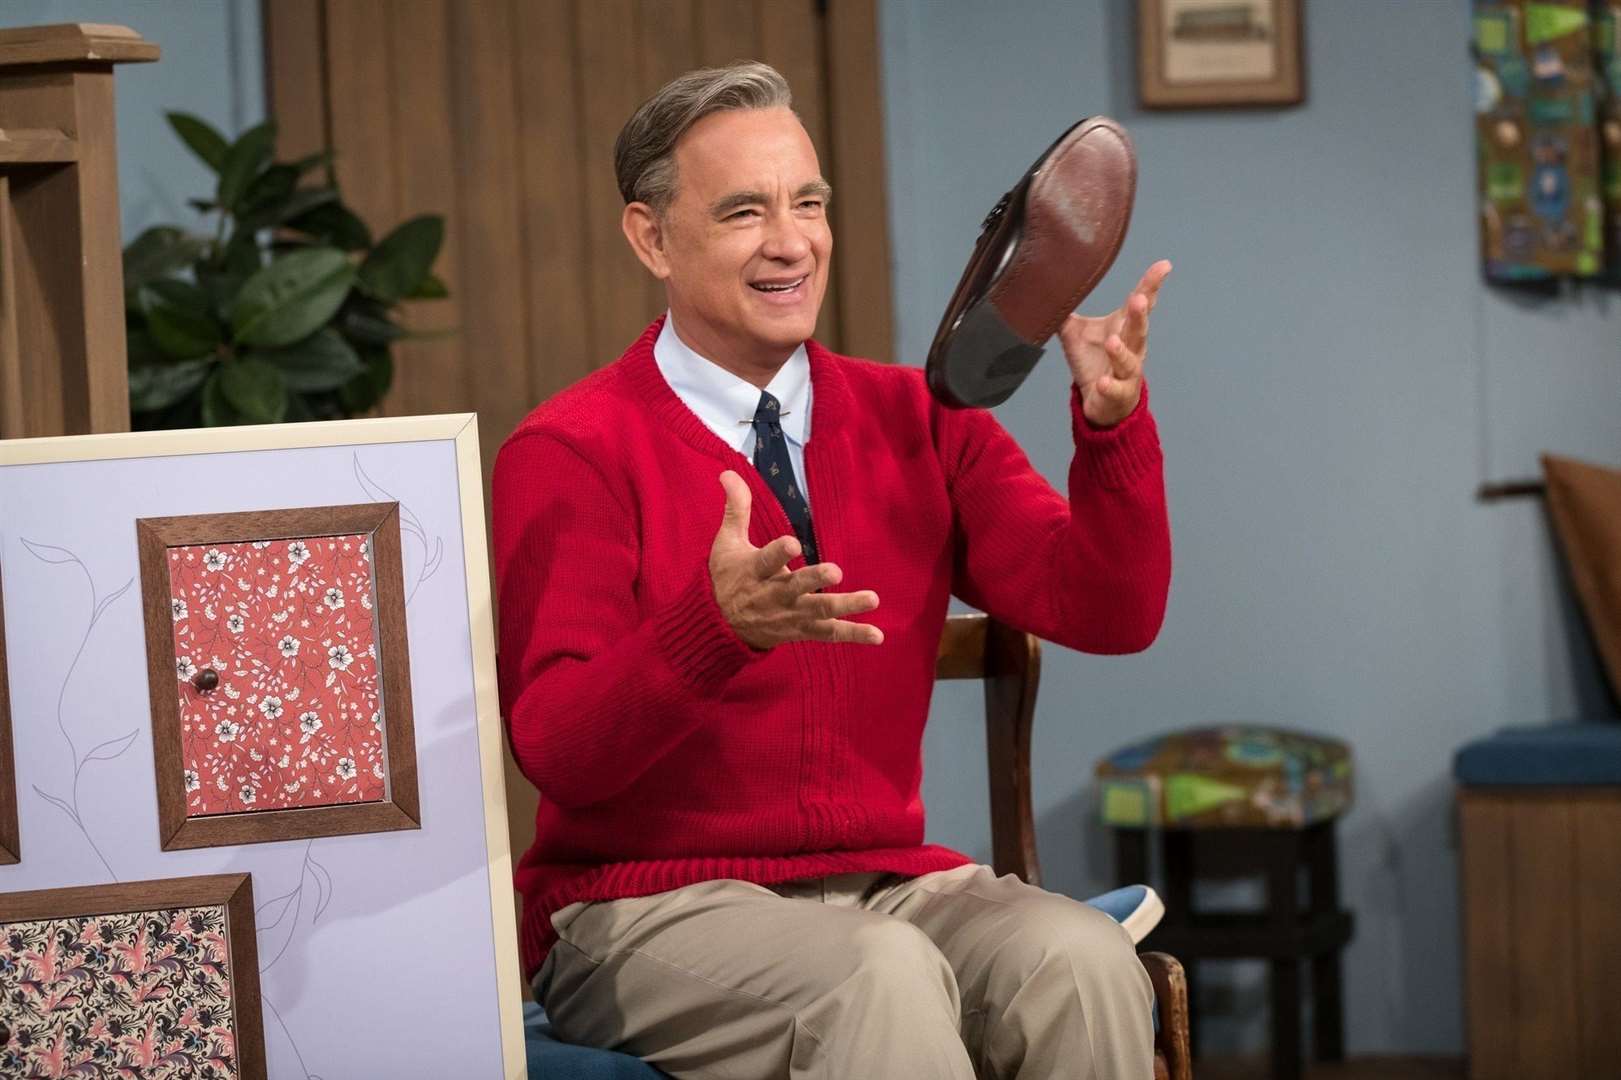 A Beautiful Day In The Neighborhood. Pictured: Tom Hanks as Fred Rogers Picture: PA Photo/CTMG, Inc./Lacey Terrell